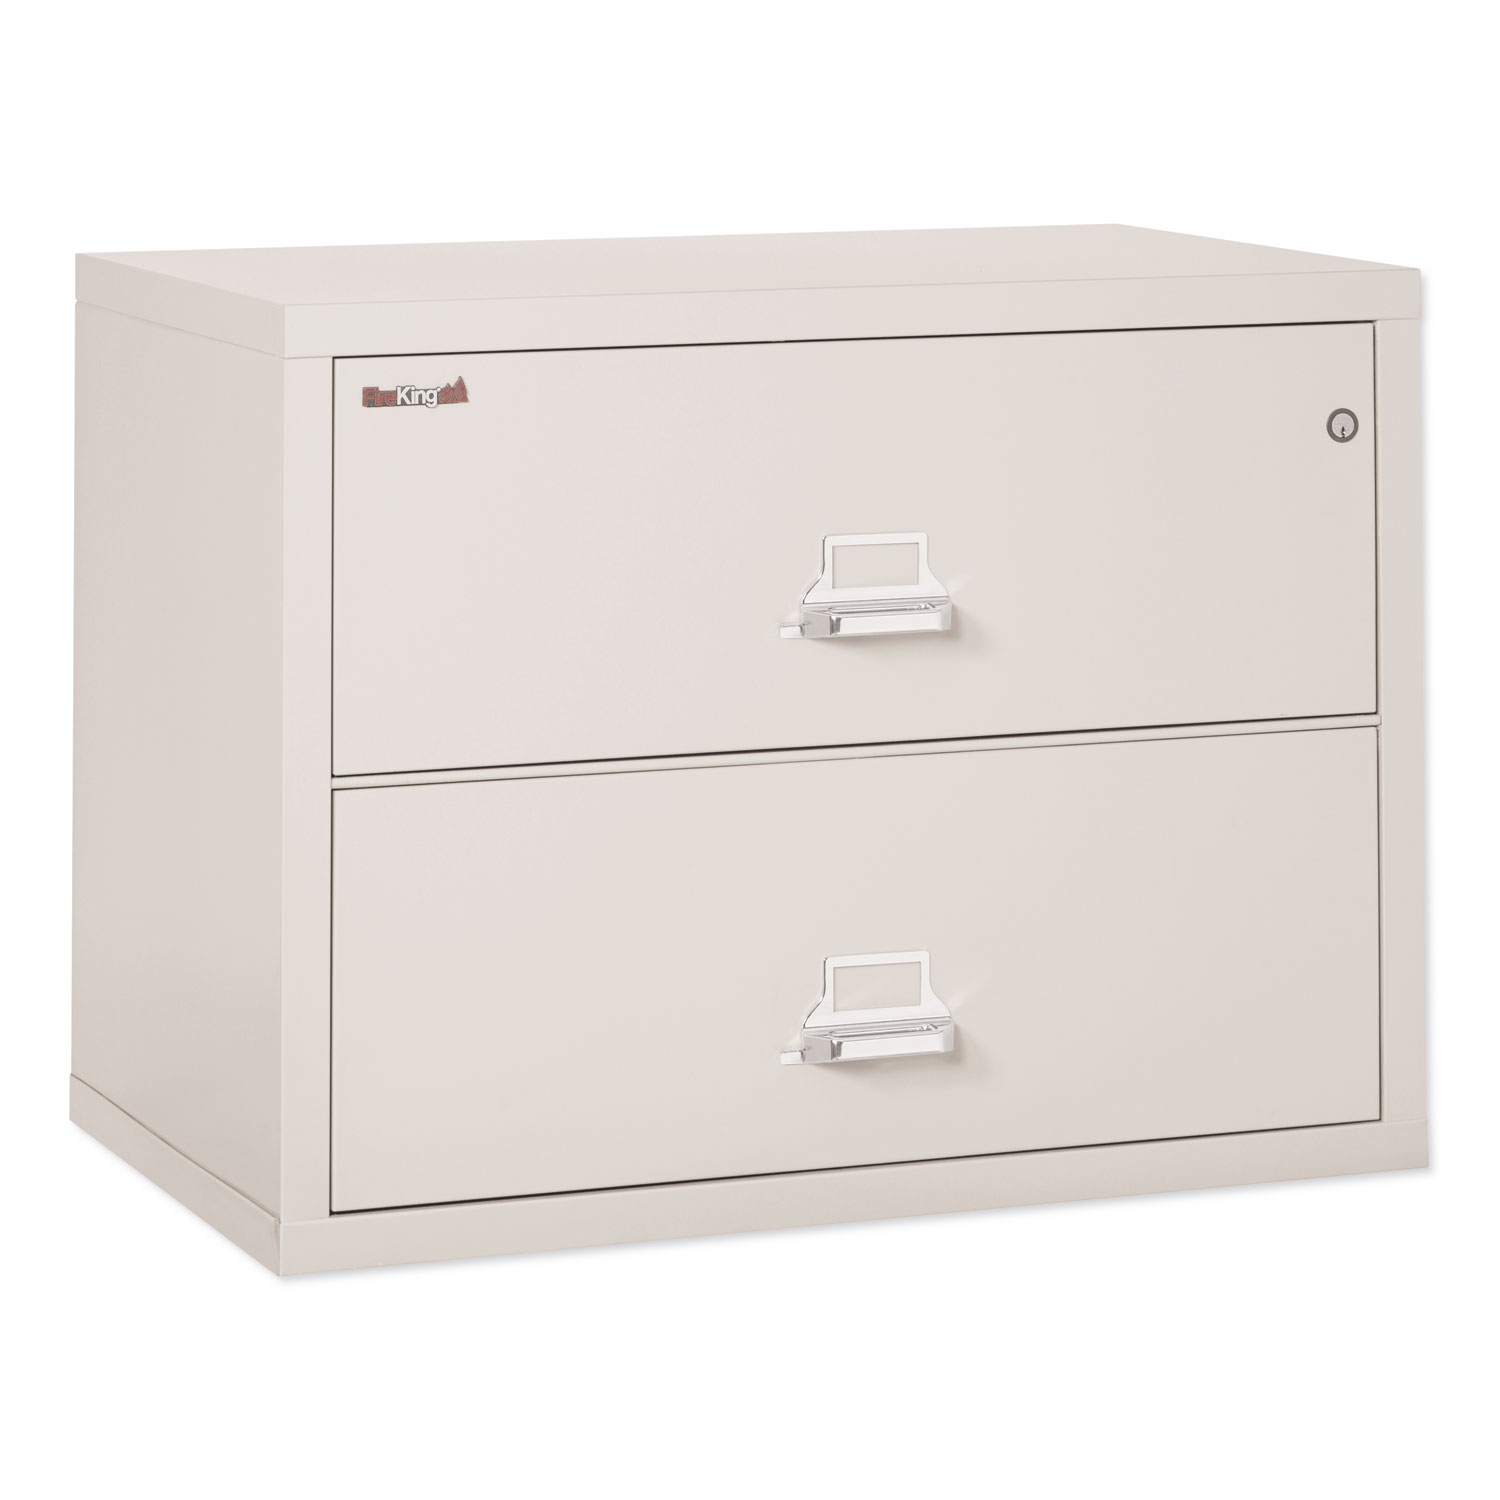  FireKing 2-3822-CPA Two-Drawer Lateral File, 37.5w x 22.13d x 27.75h, UL Listed 350°, Letter/Legal, Parchment (FIR23822CPA) 